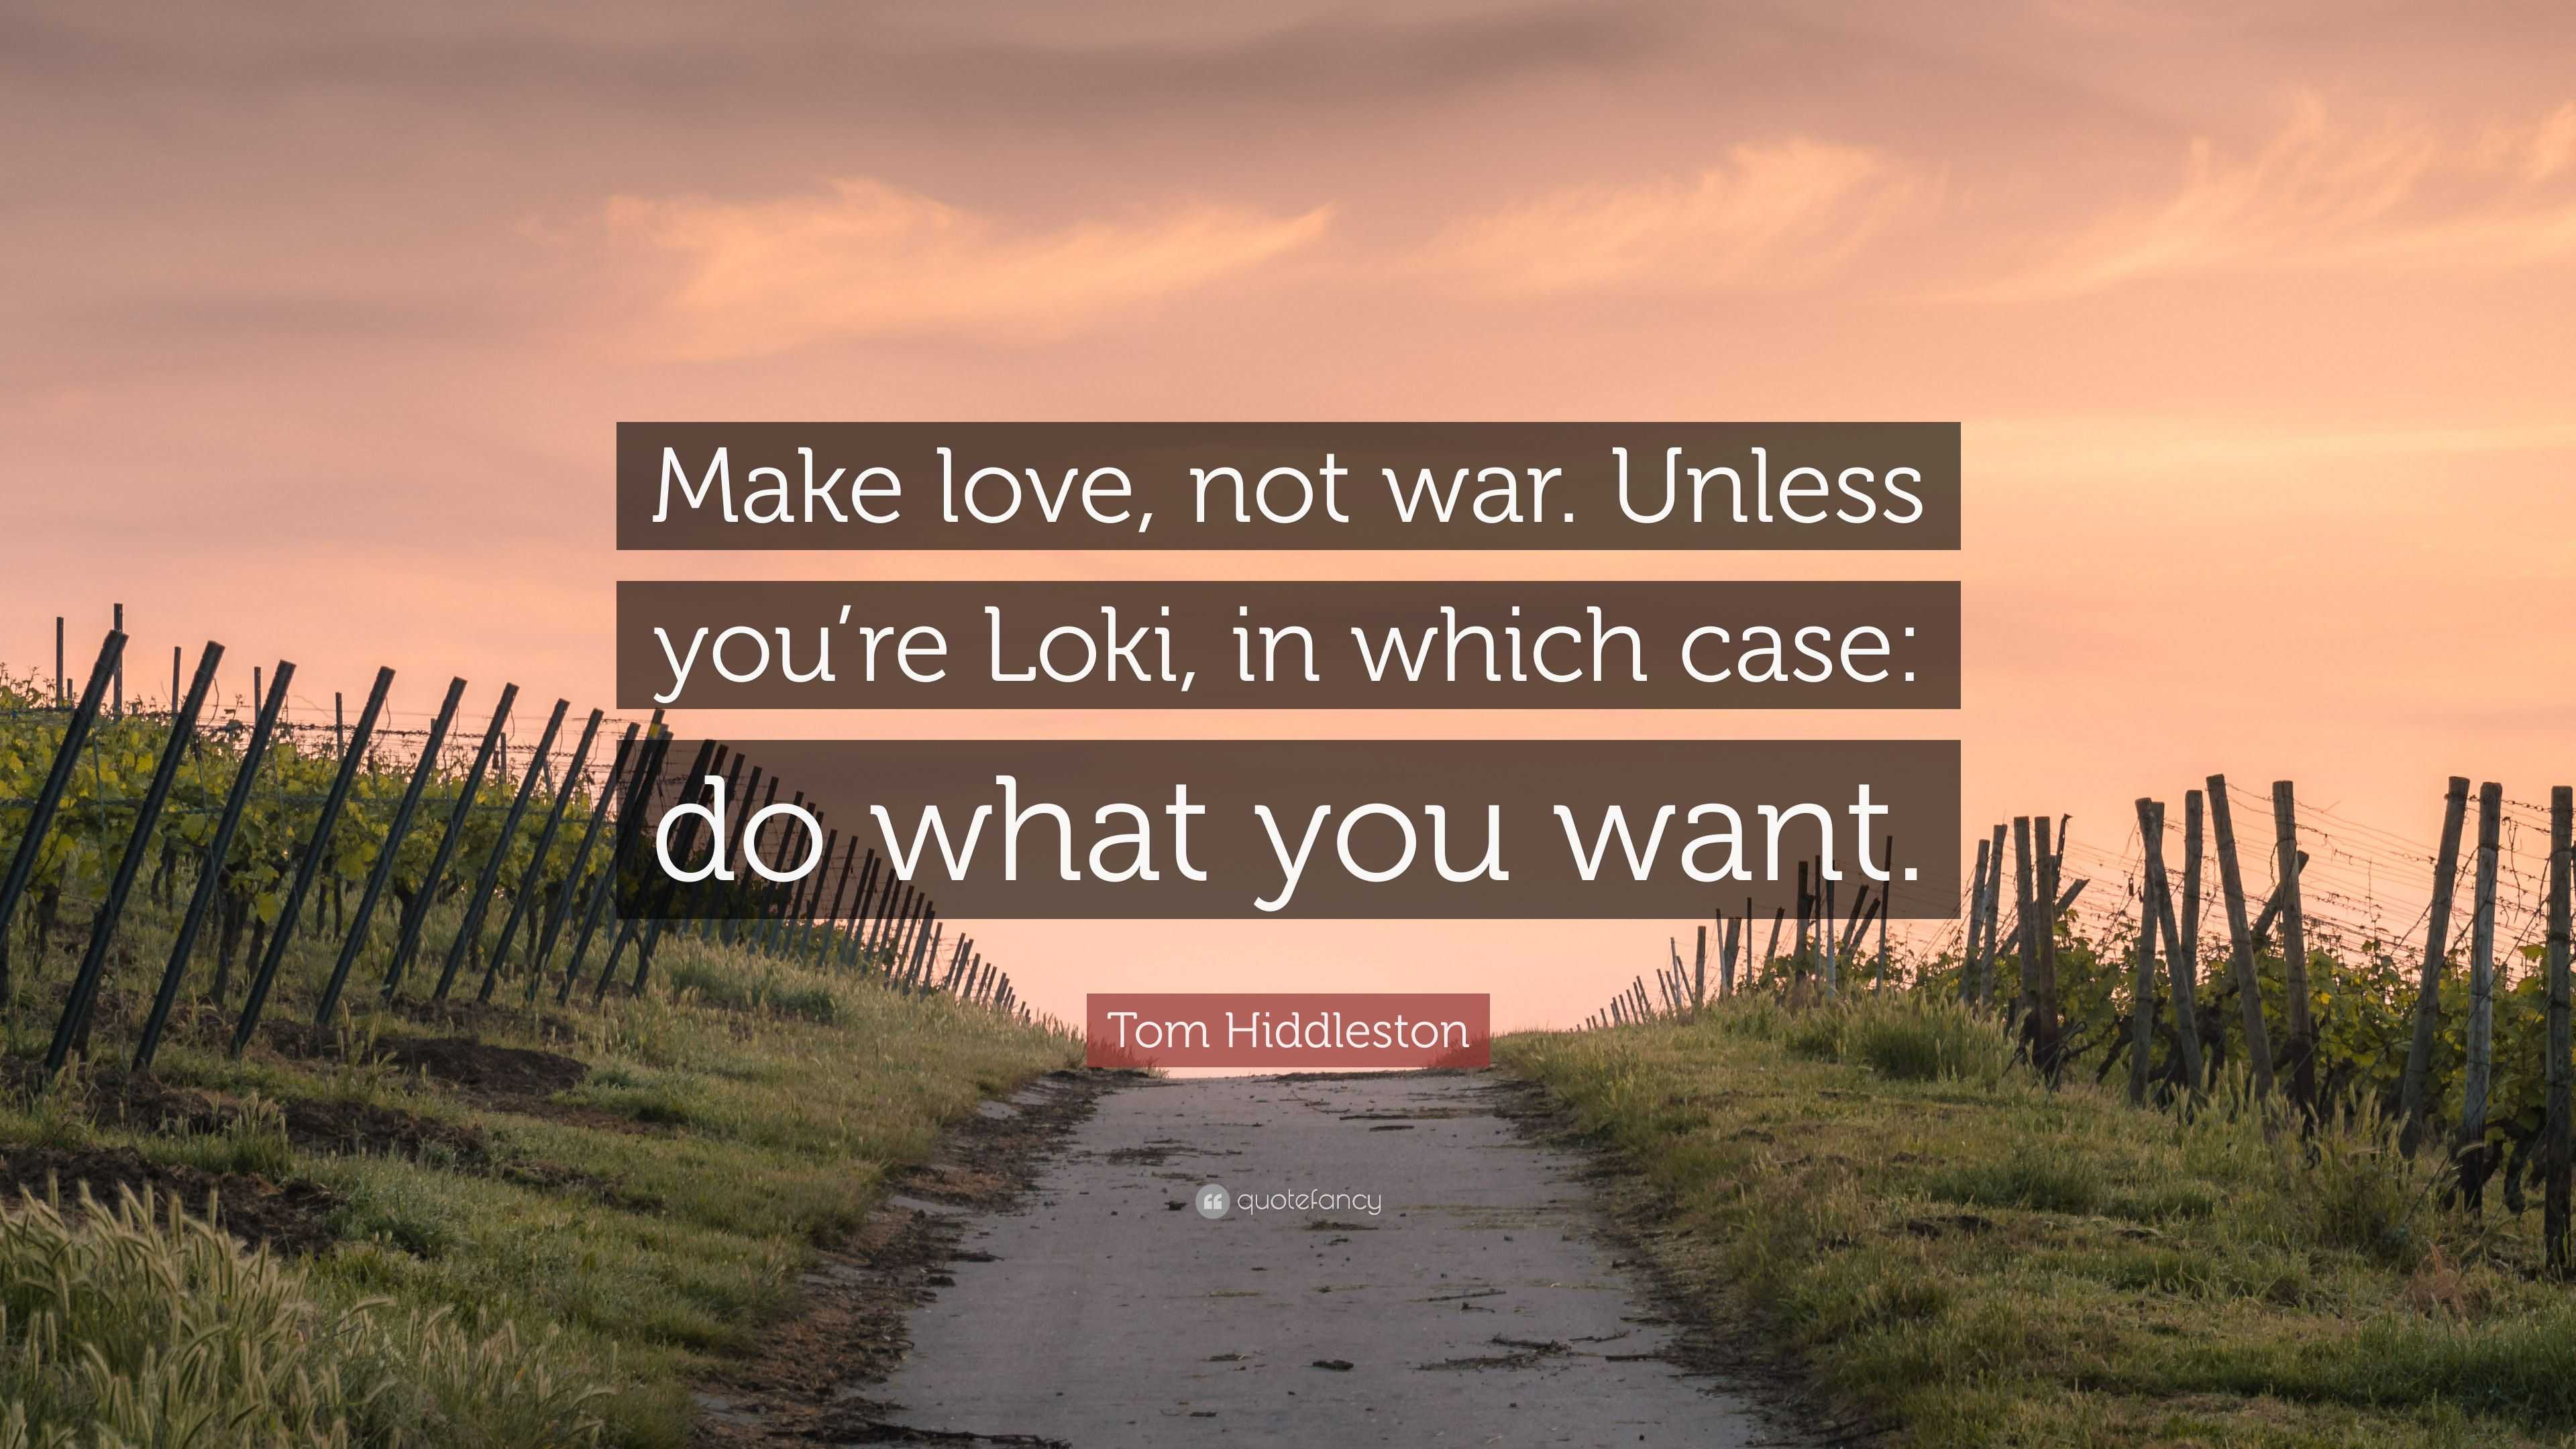 Tom Hiddleston Quote Make Love Not War Unless You Re Loki In Which Case Do What